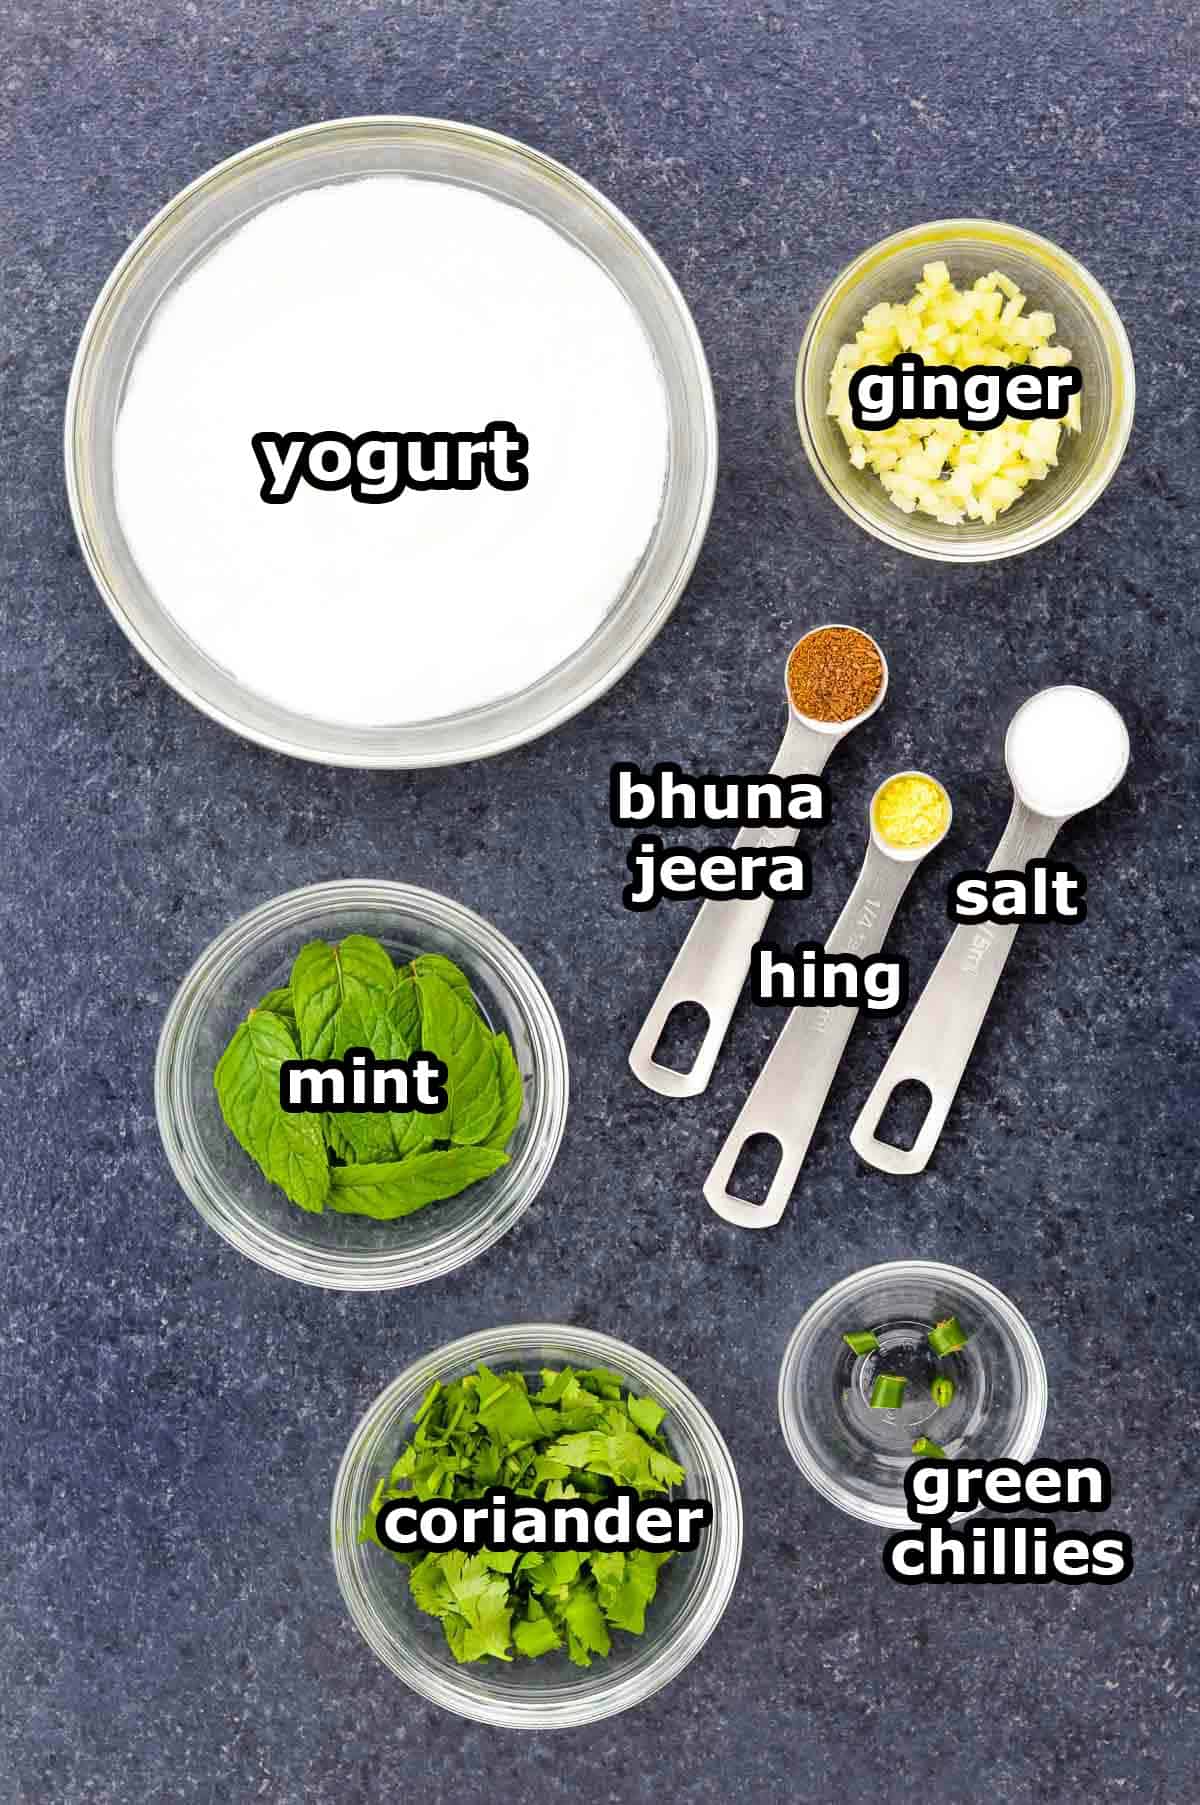 top shot of all the ingredients to make masala chaas, along with ingredient labels